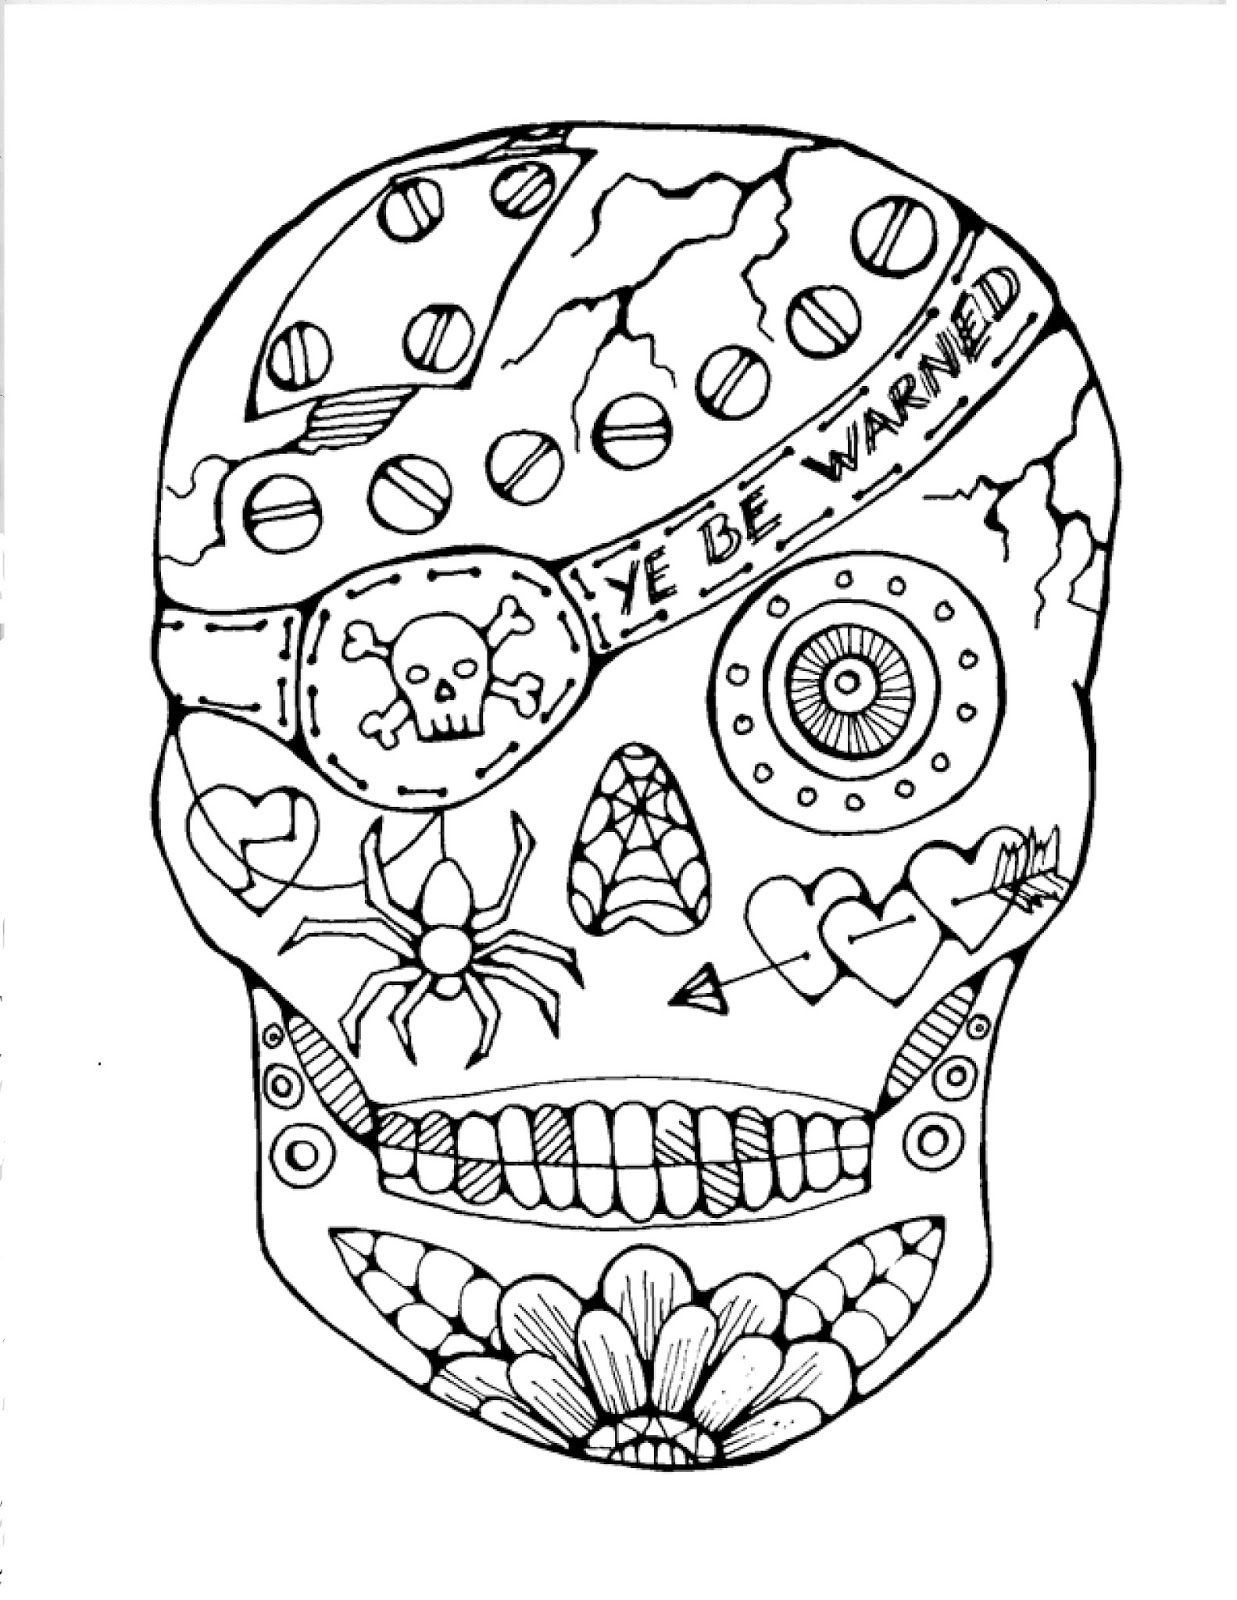 sugar-skull-day-of-the-dead-coloring-pages